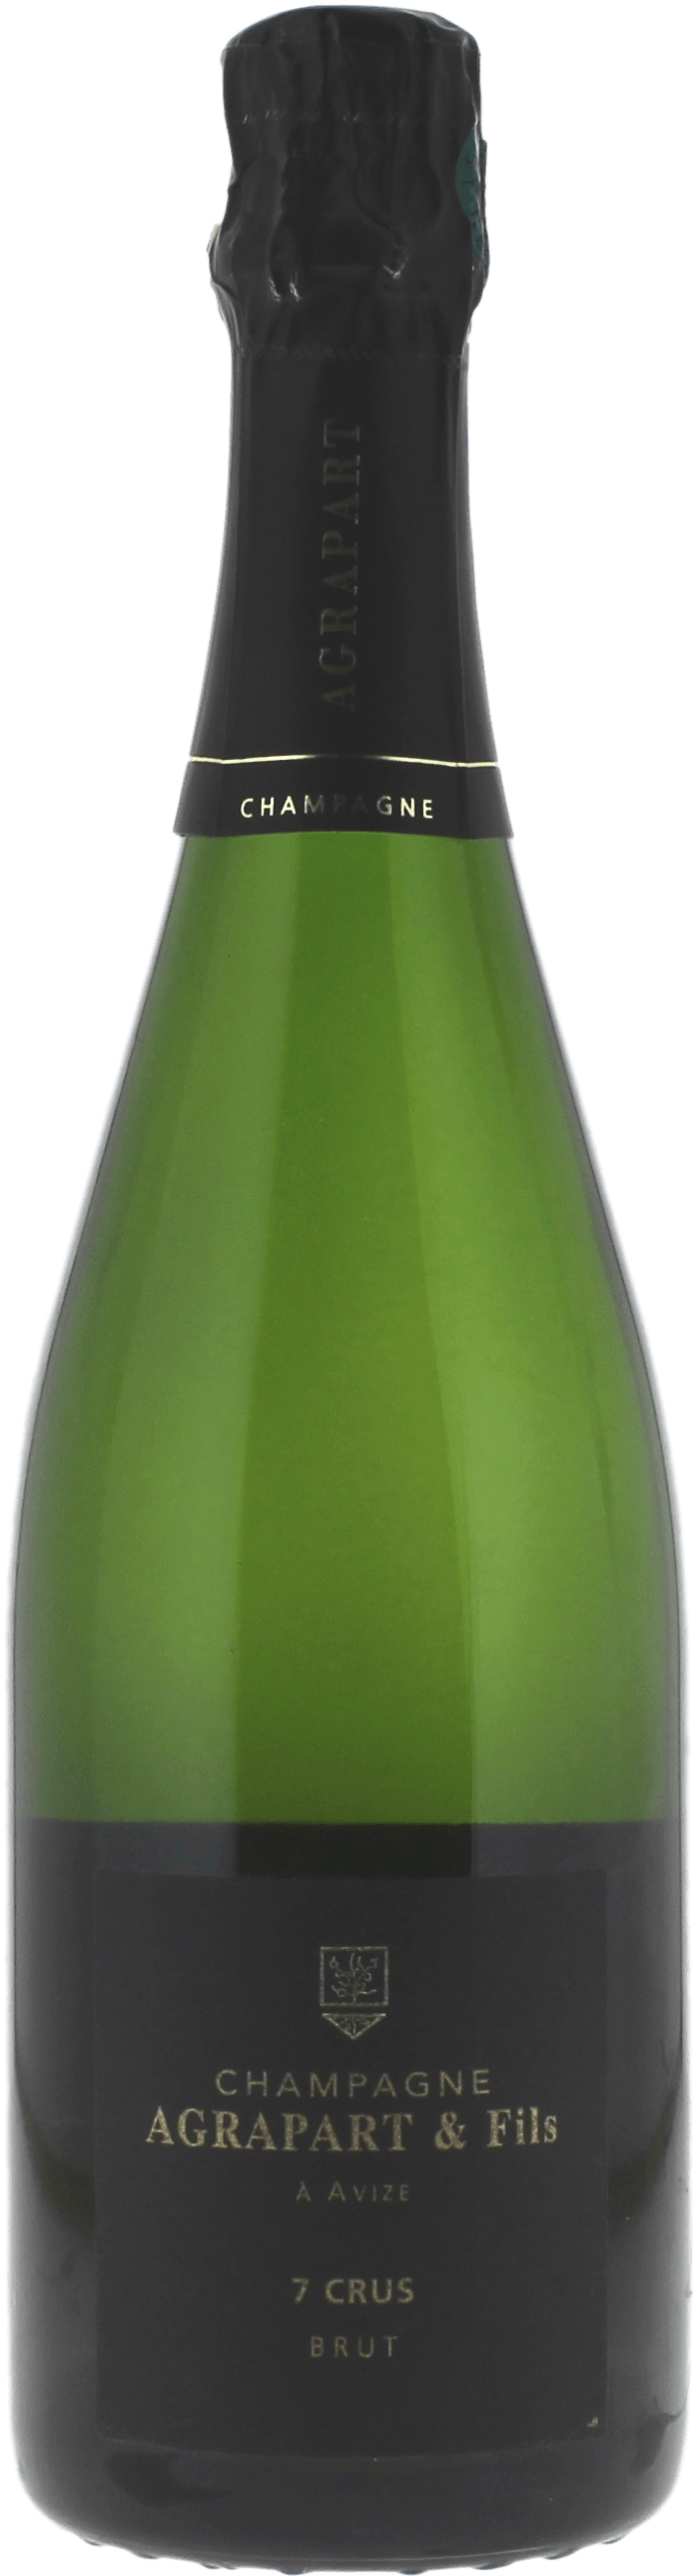 Agrapart  7 crus brut  Agrapart & Fils, Champagne